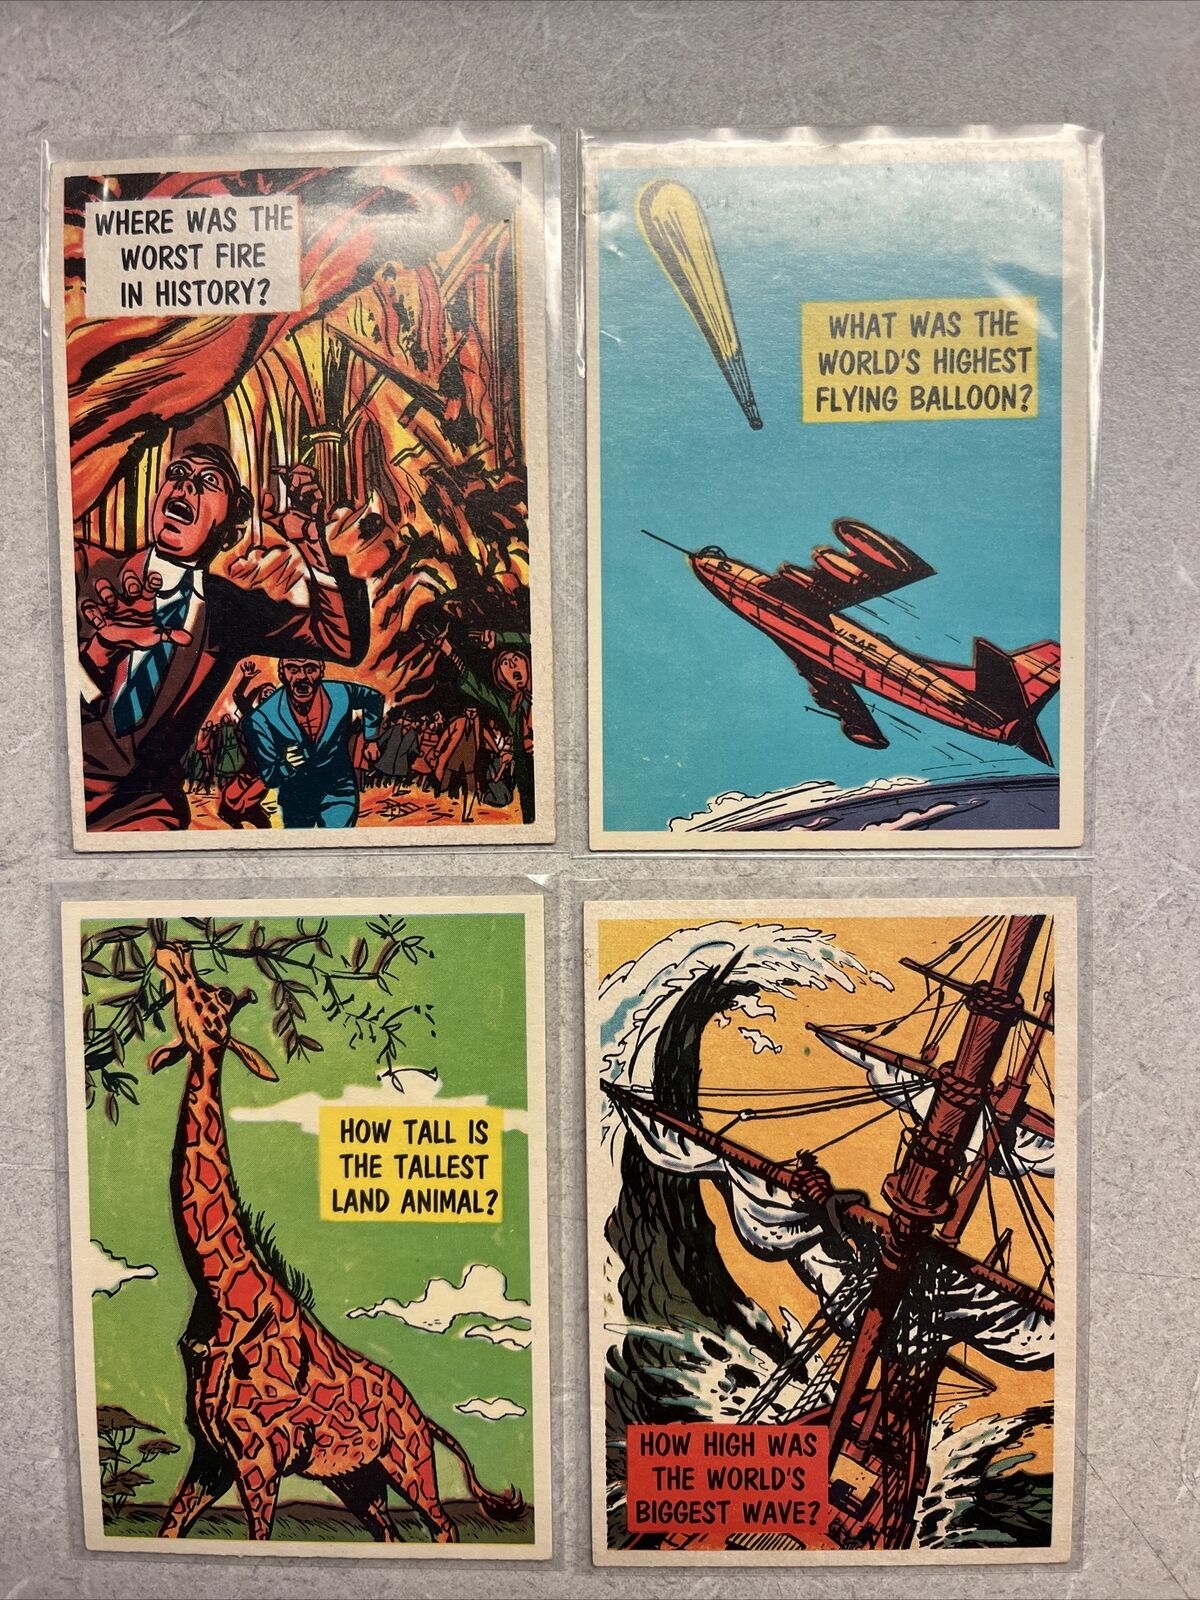 1957 Topps Isolation Booth Lot - #18, #20,#40 And #83